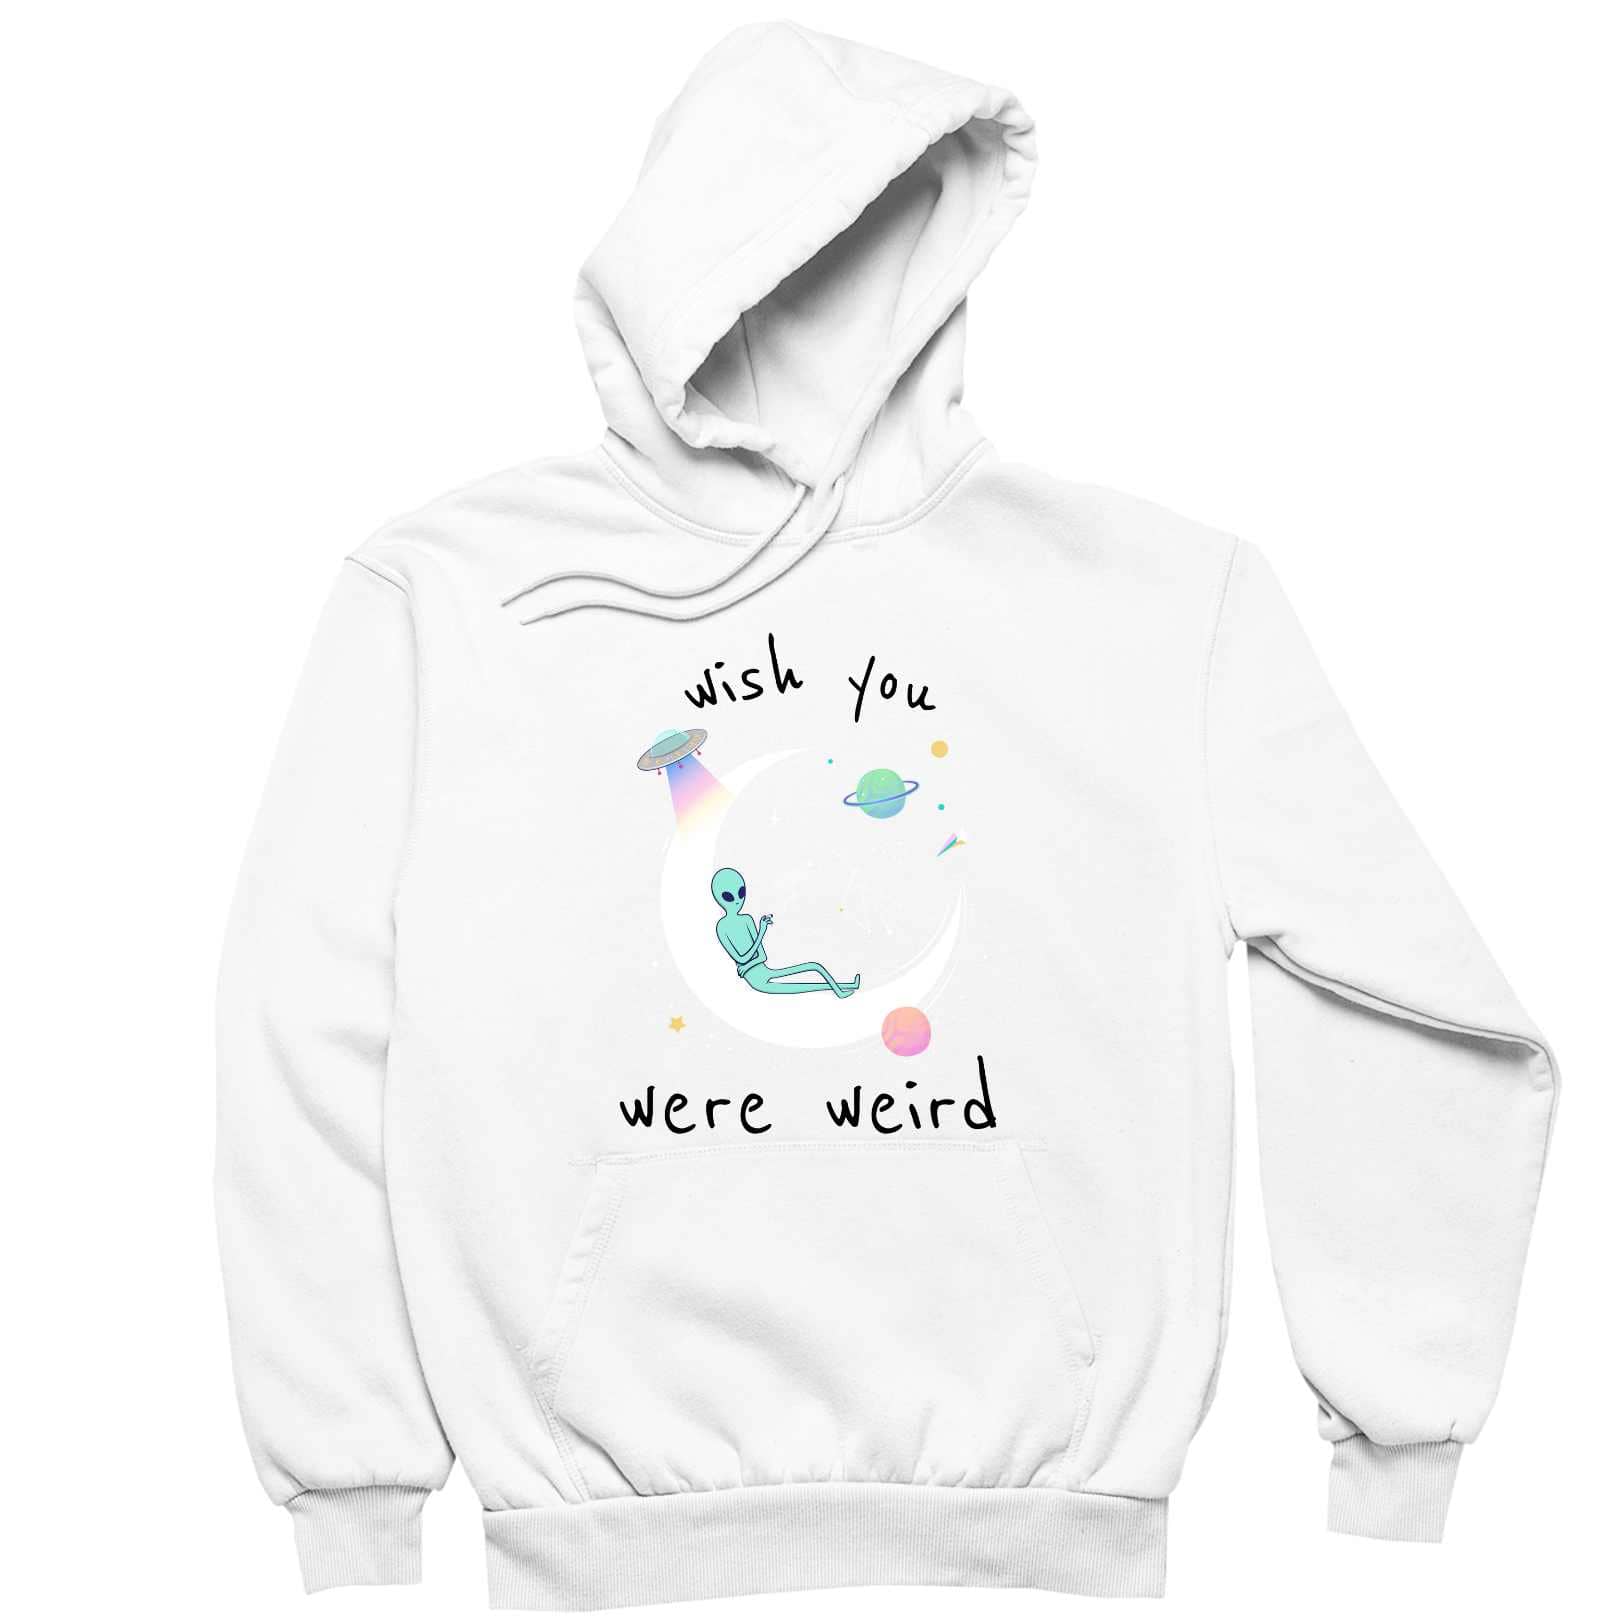 Wish you were weird : Graphic Hoodie for Men and Women